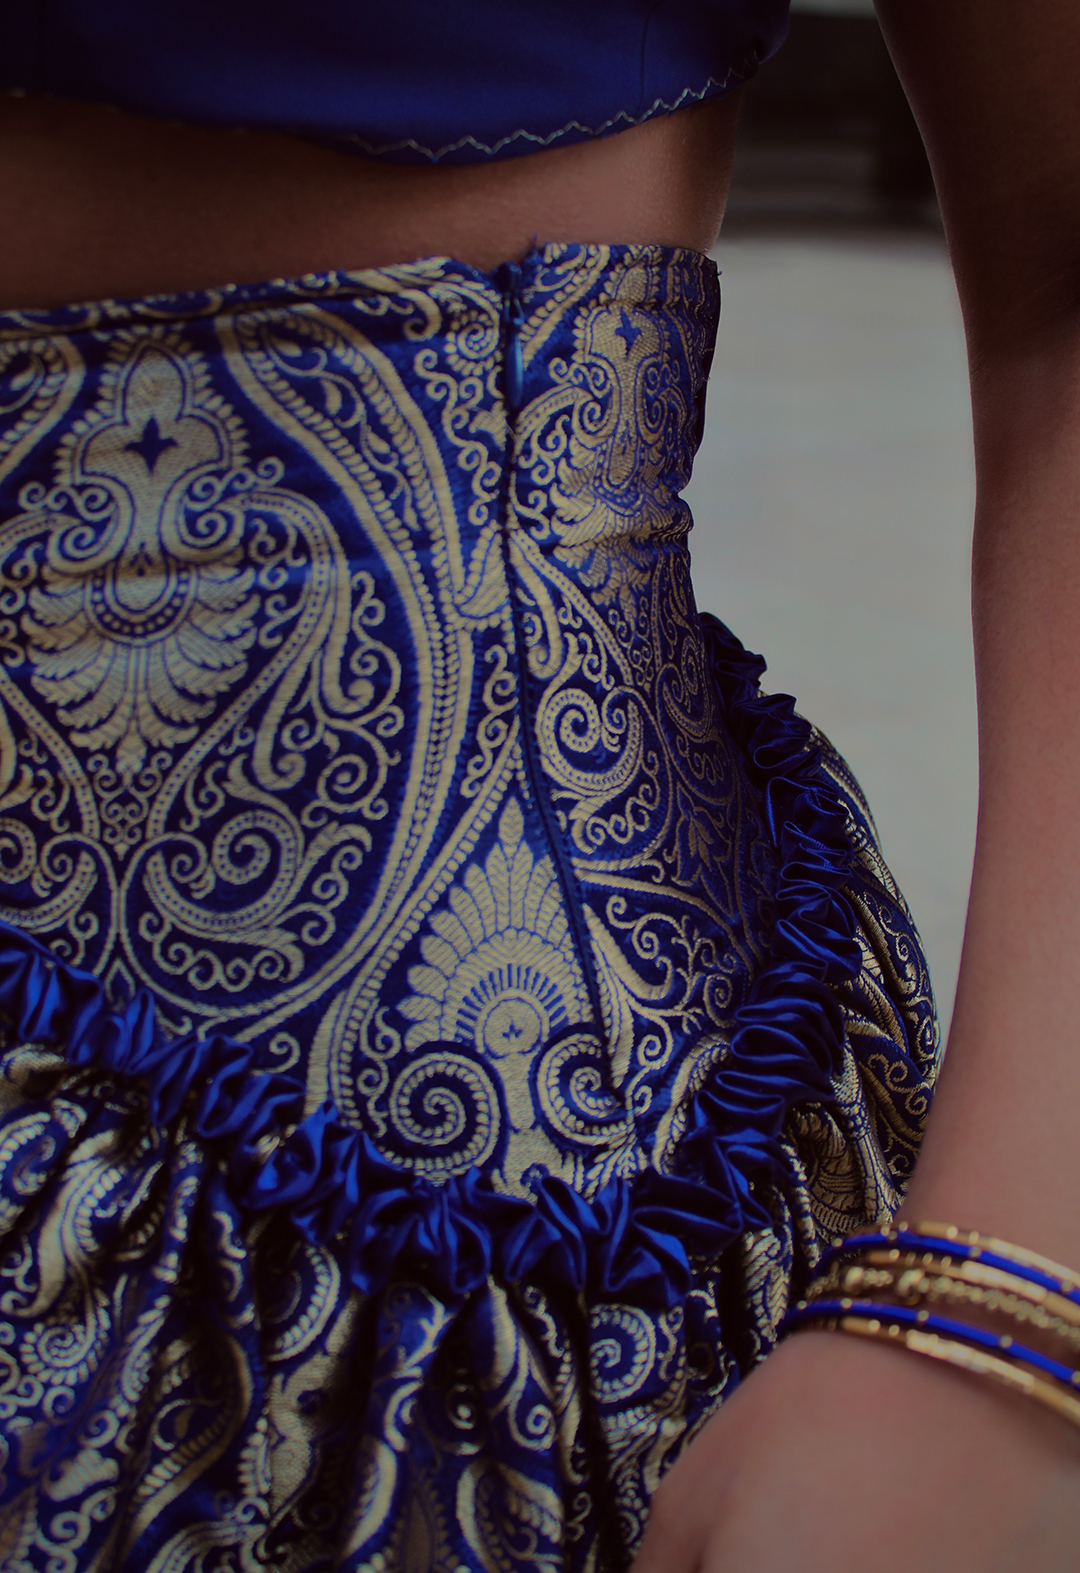 This close up shot of the waist of the skirt shows the contrast binding between the waist yoke and the gather skirt, giving the skirt more dimension. The pattern of the brocade is also more defined, allowing the richness and elegance of the fabric to shine through.